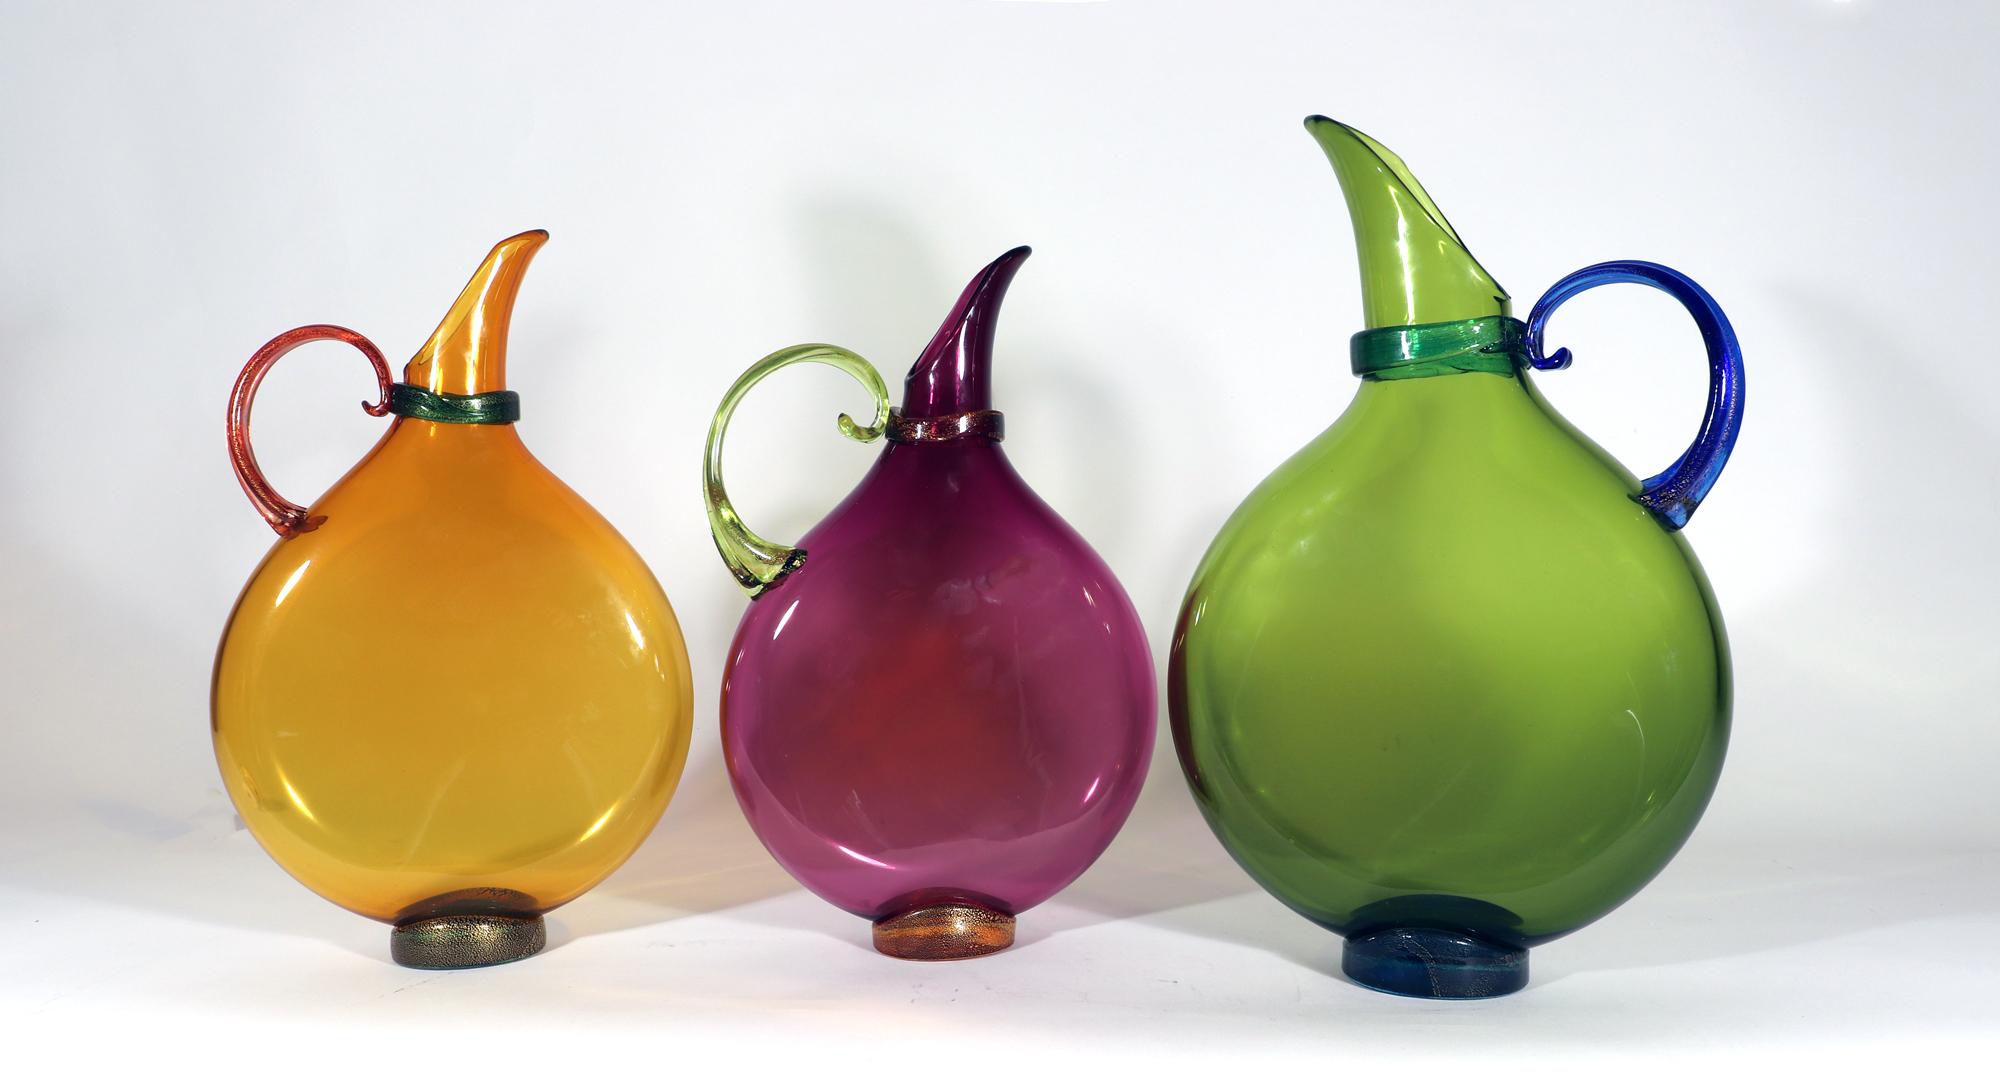 Art glass hand blown flat transparent glass pitchers,
Set of Three.
Nine Iron Studios, Pa.

The grouping of three Nine Iron Studios hand blown flat transparent art glass pitchers in amethyst, topaz, and olive. Each are raised on a gold flecked